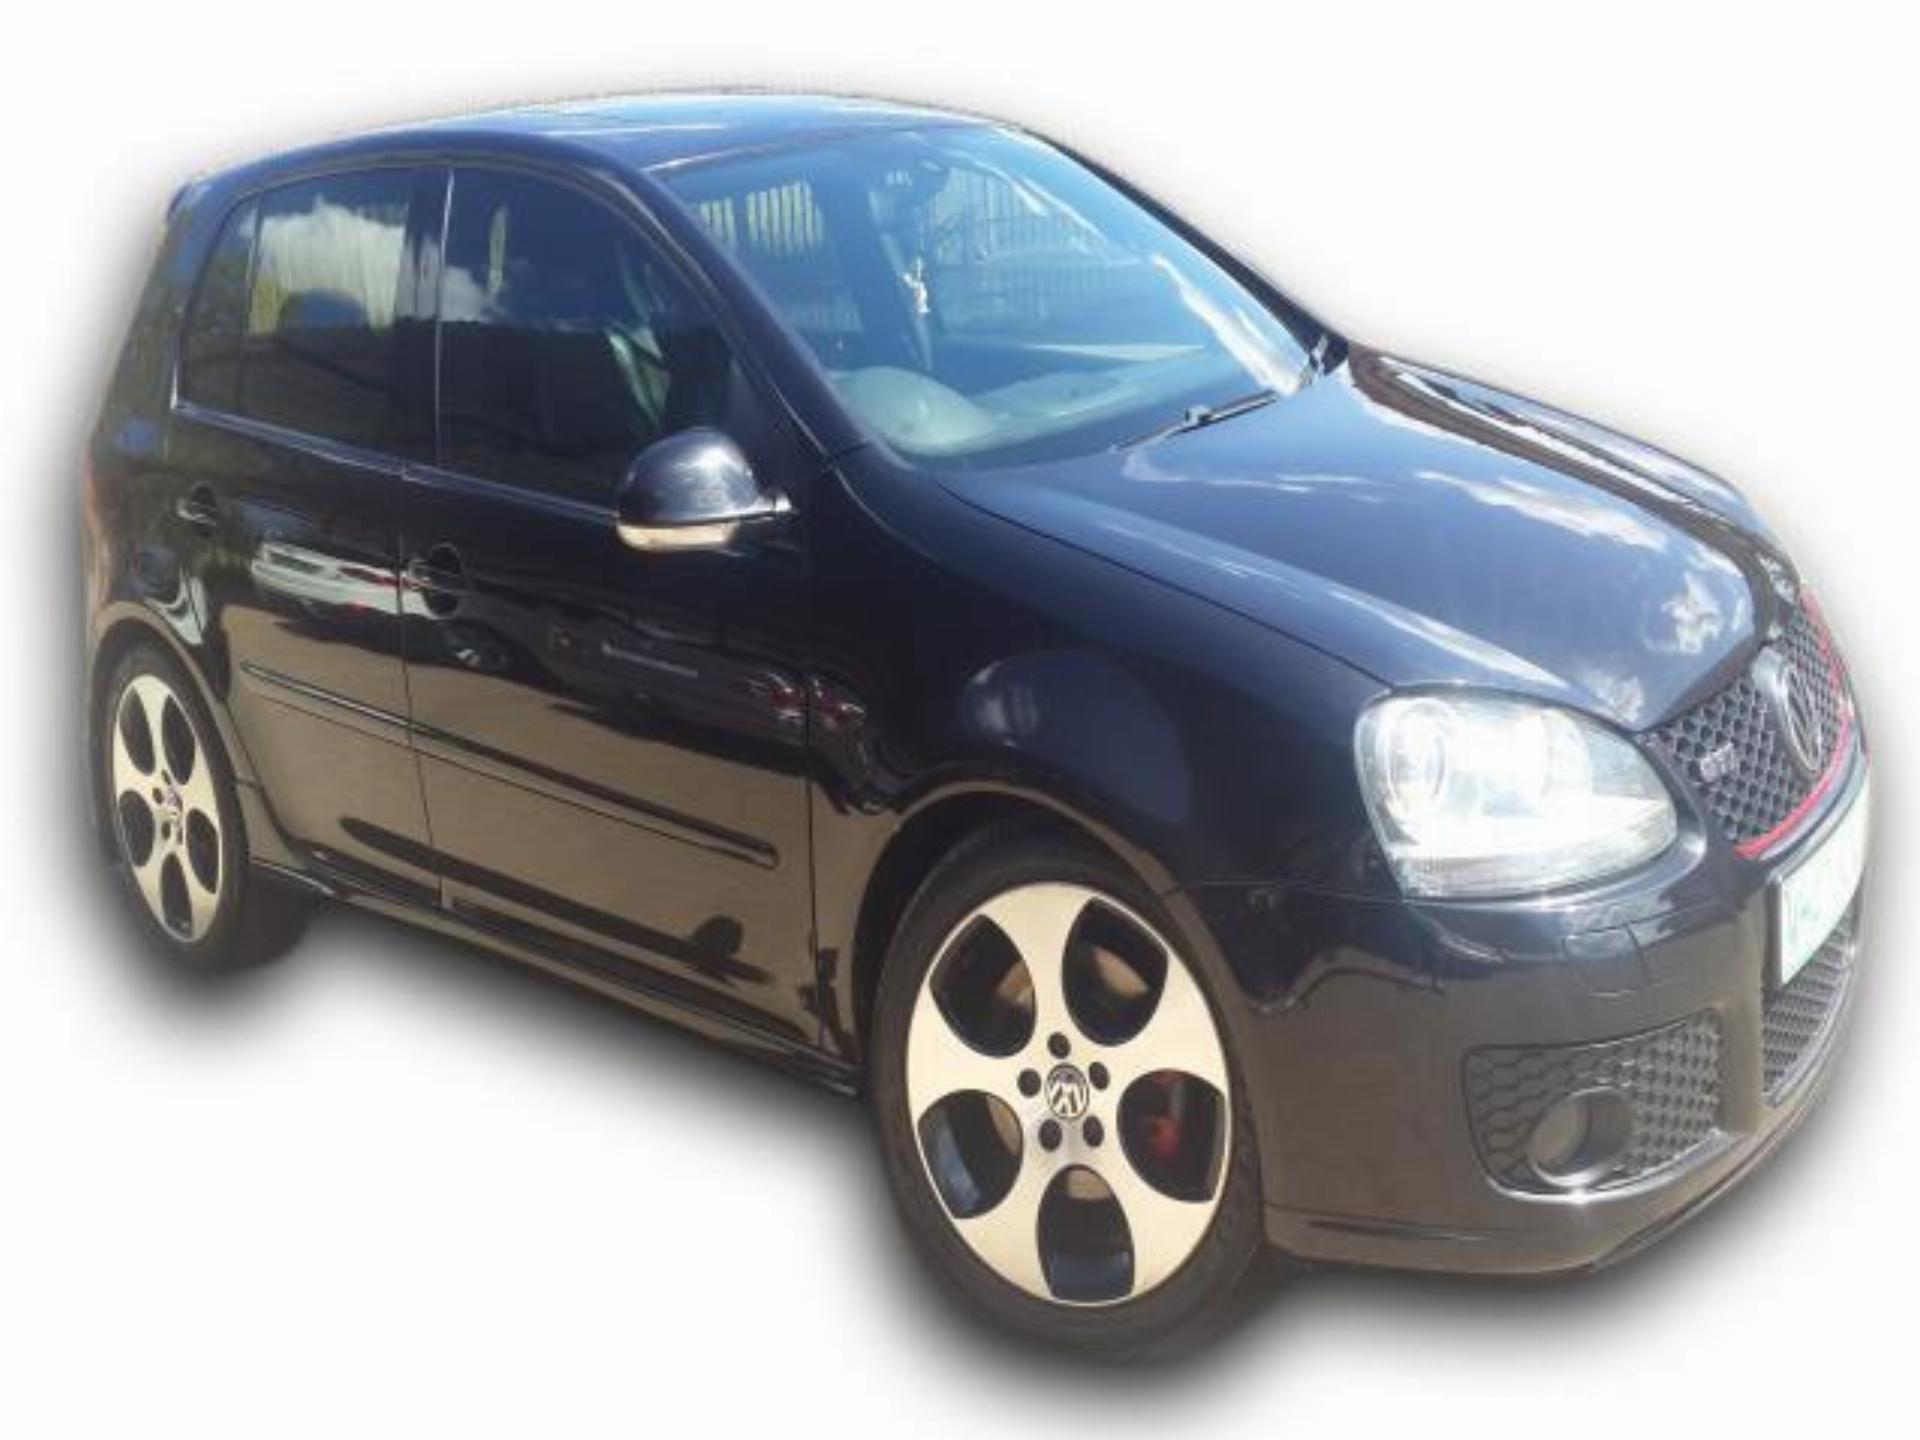 Used Volkswagen Golf 5 2.0 Gti 2007 on auction PV1005217